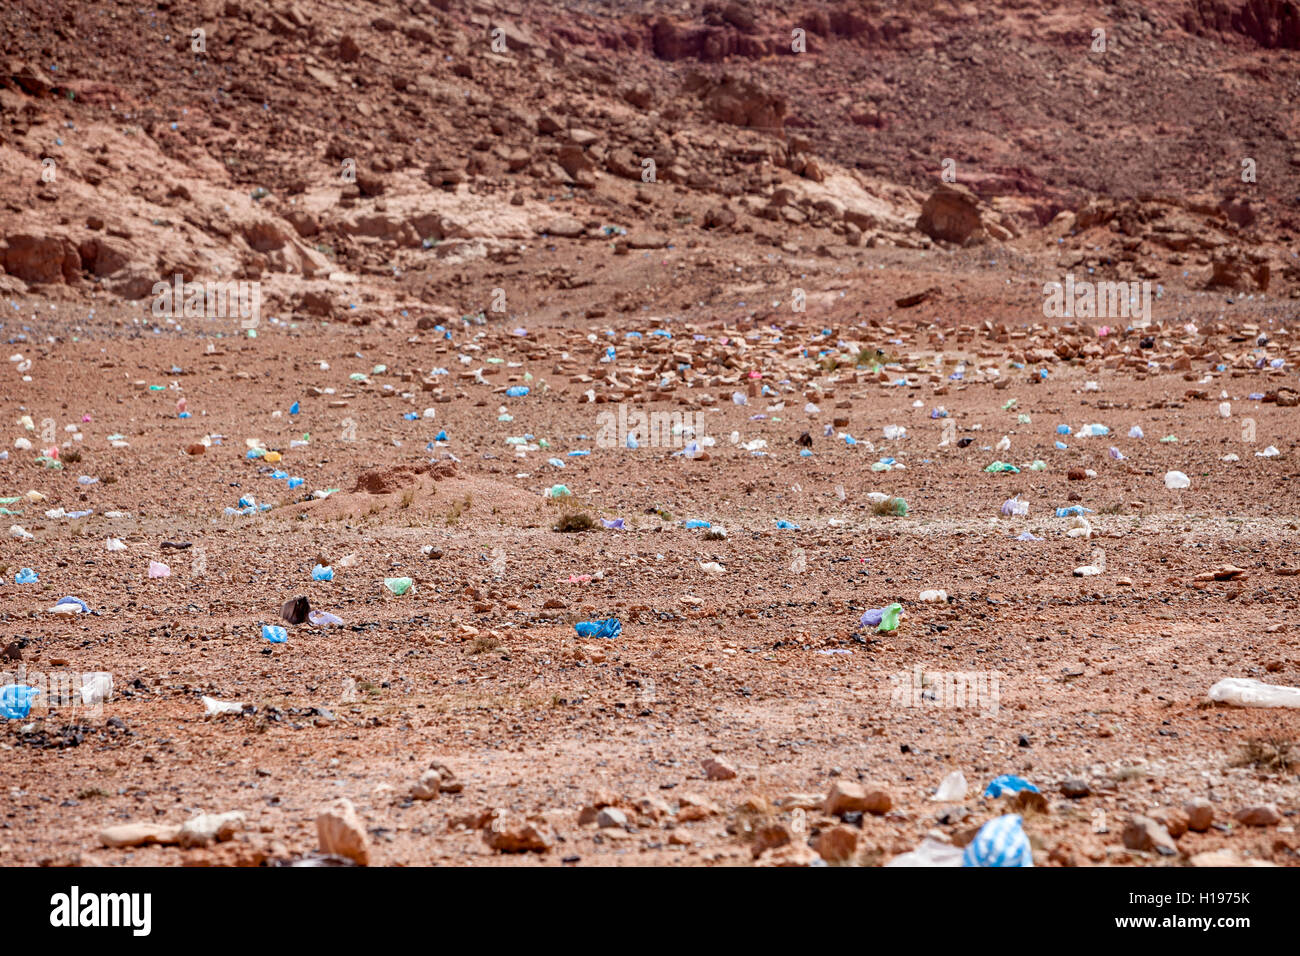 Tineghir, Morocco.  Plastic Waste Litters the Landscape. Stock Photo